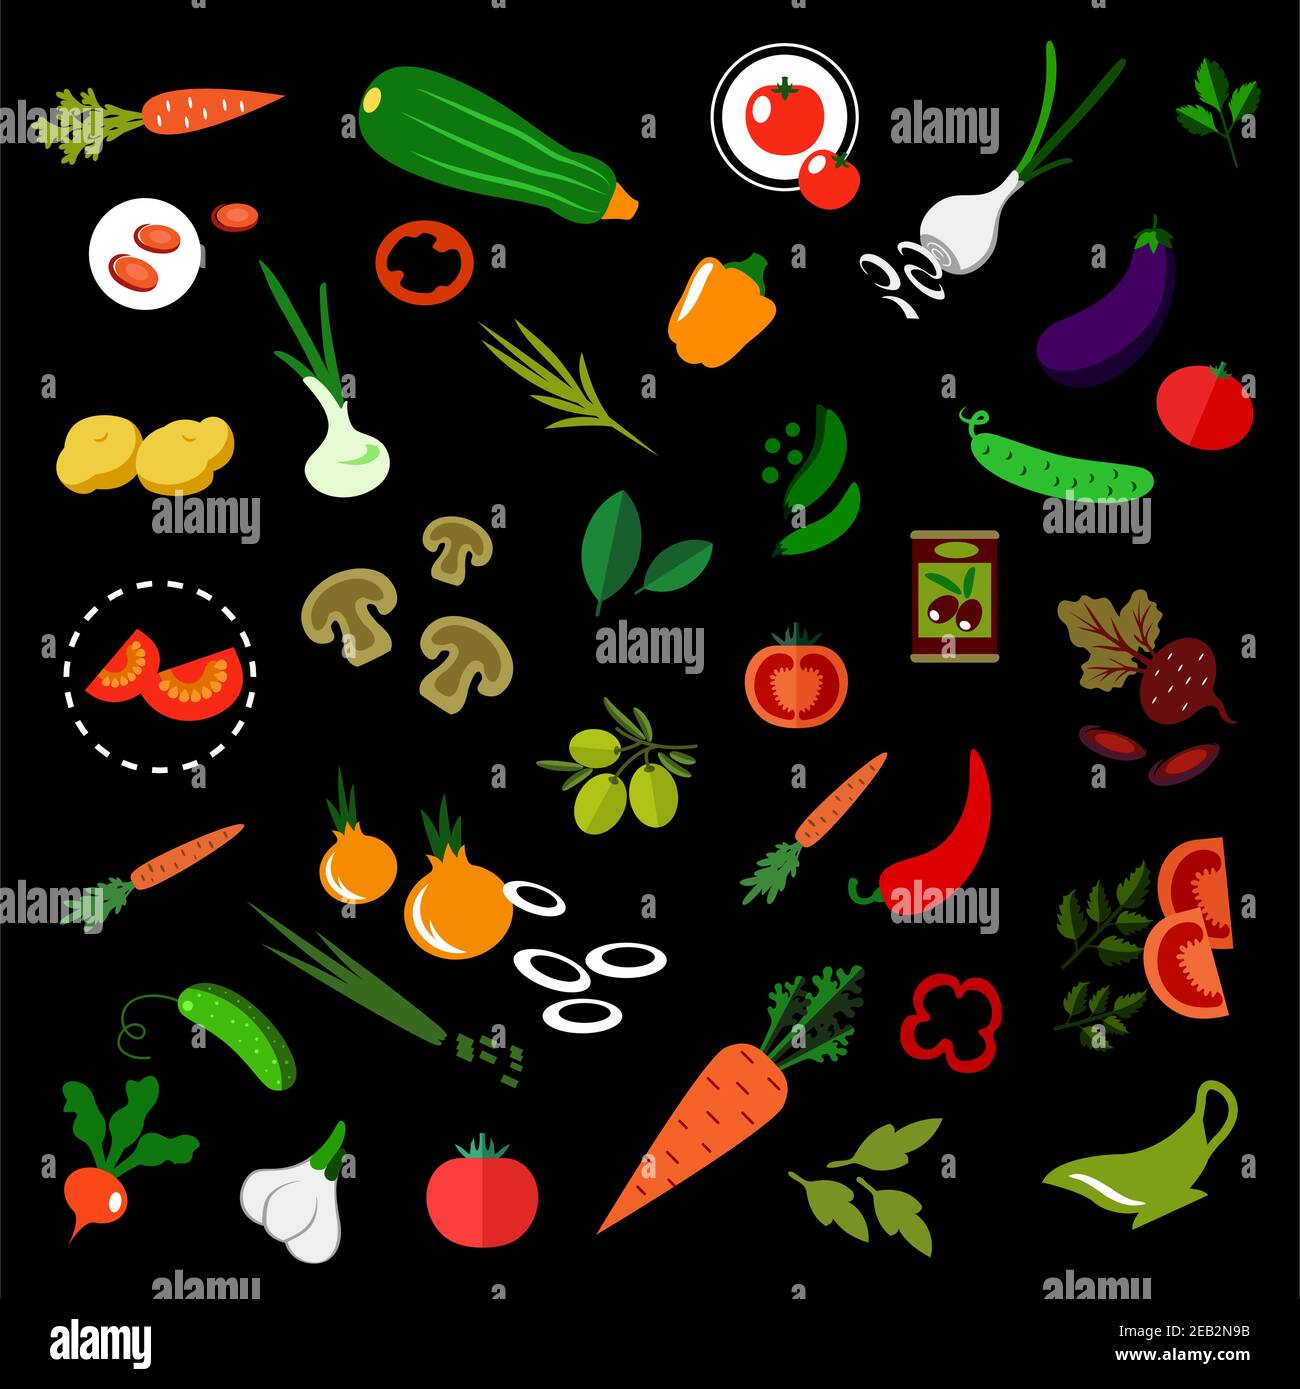 Flat icons of fresh vegetables with tomatoes, carrots, cucumbers, onions, potatoes, chili and bell peppers, green peas, fresh and pickled olives, zucc Stock Vector